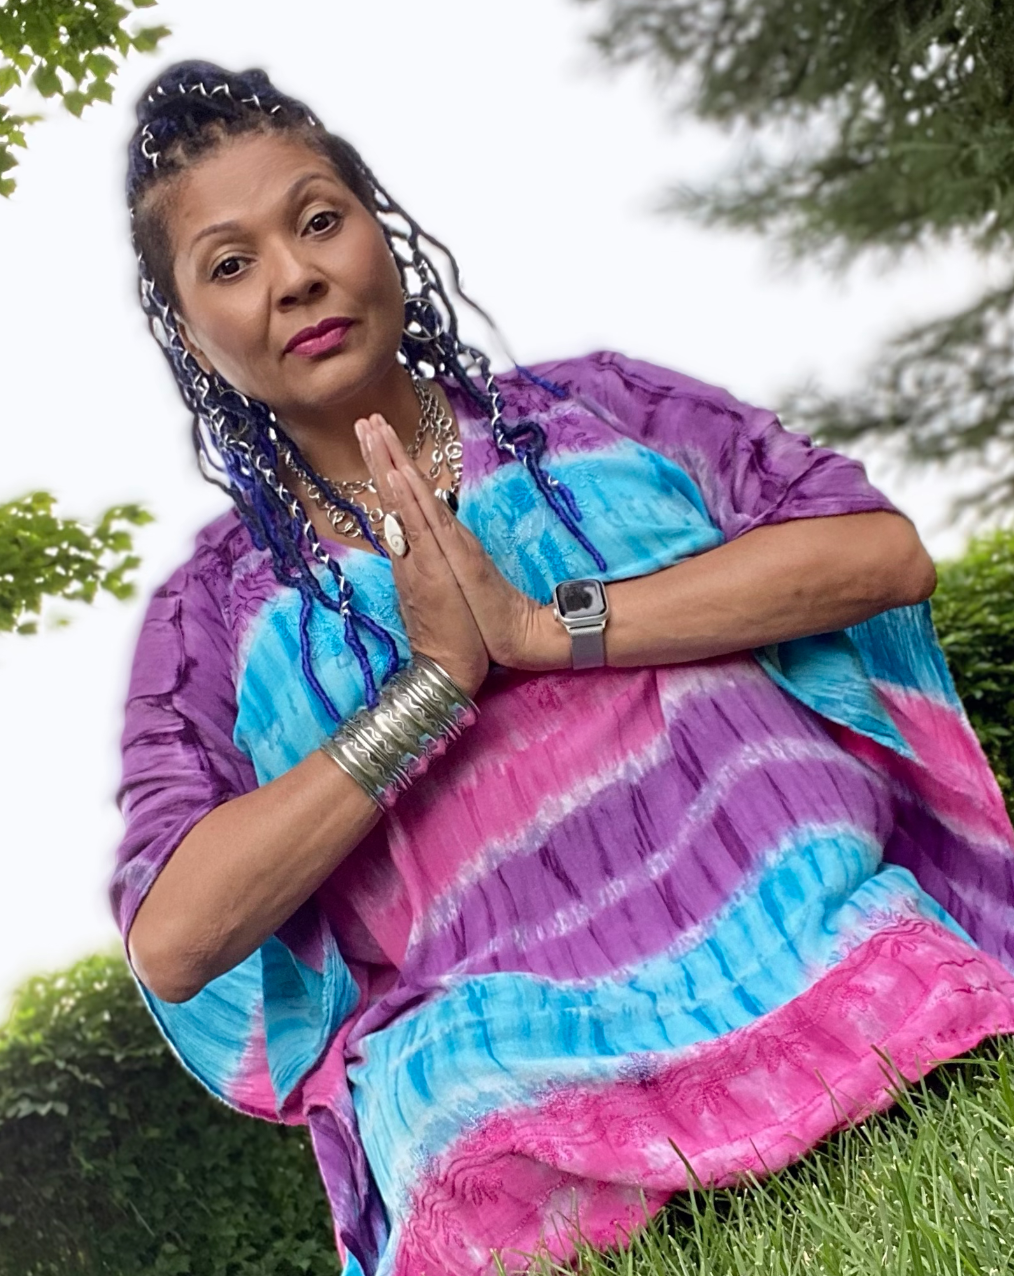 ModernWell member Dorothy Inez, Spiritual Practitioner, in a tie-die tshirt with hands in prayer and peaceful expression.